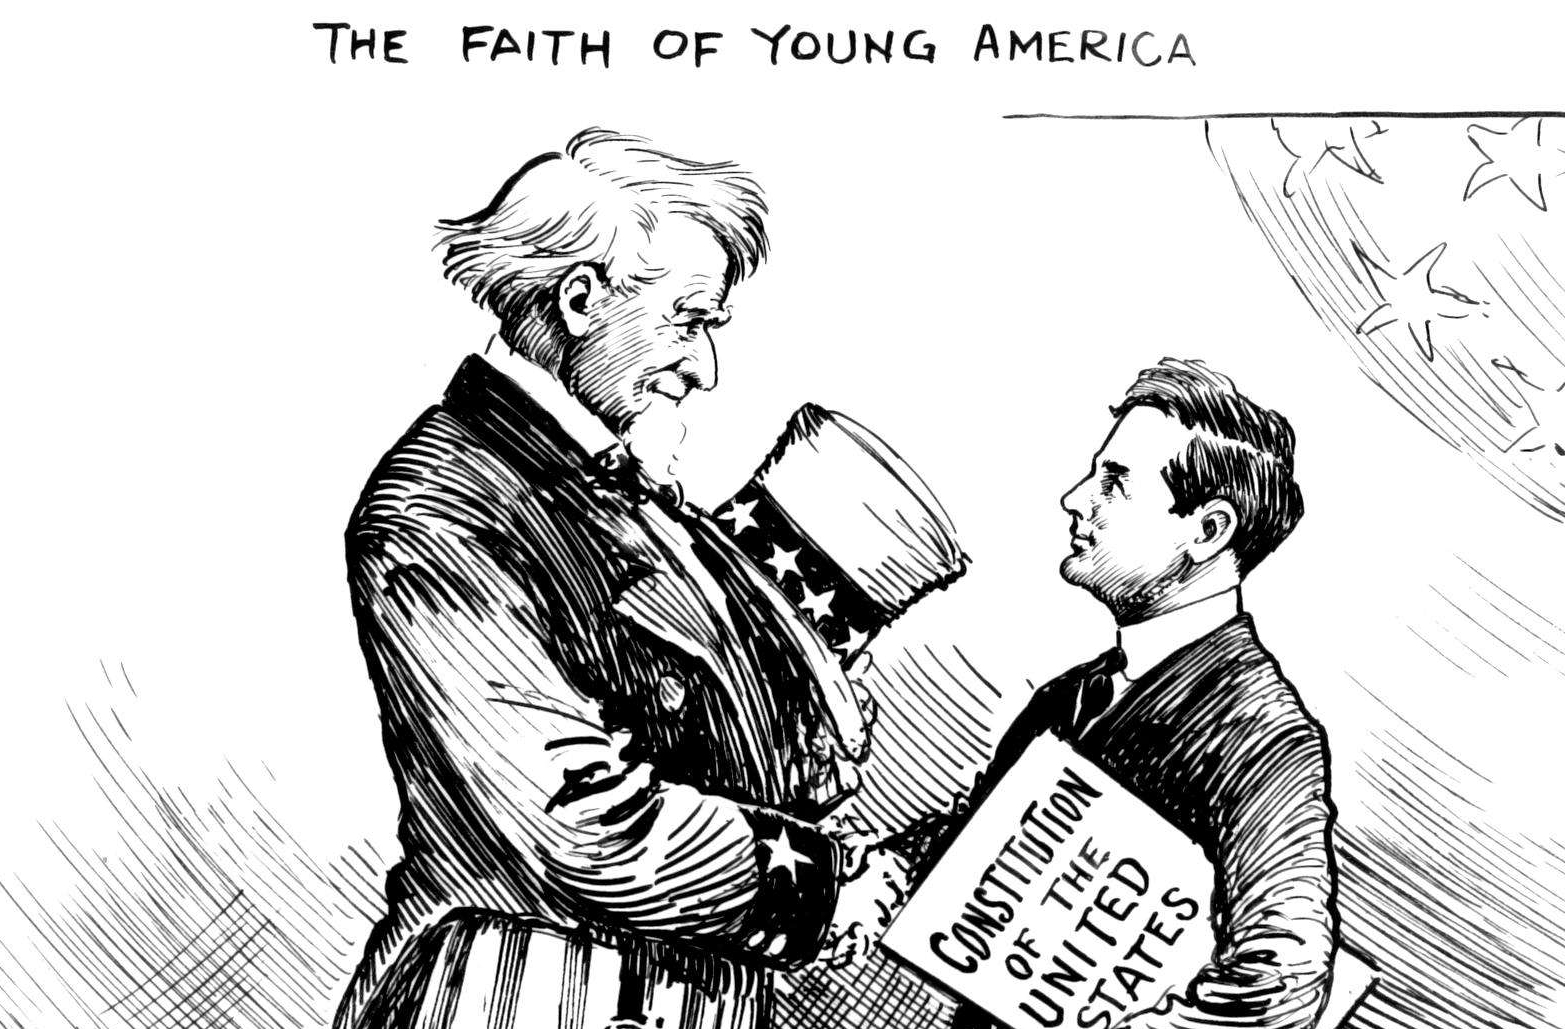 The Faith of Young America